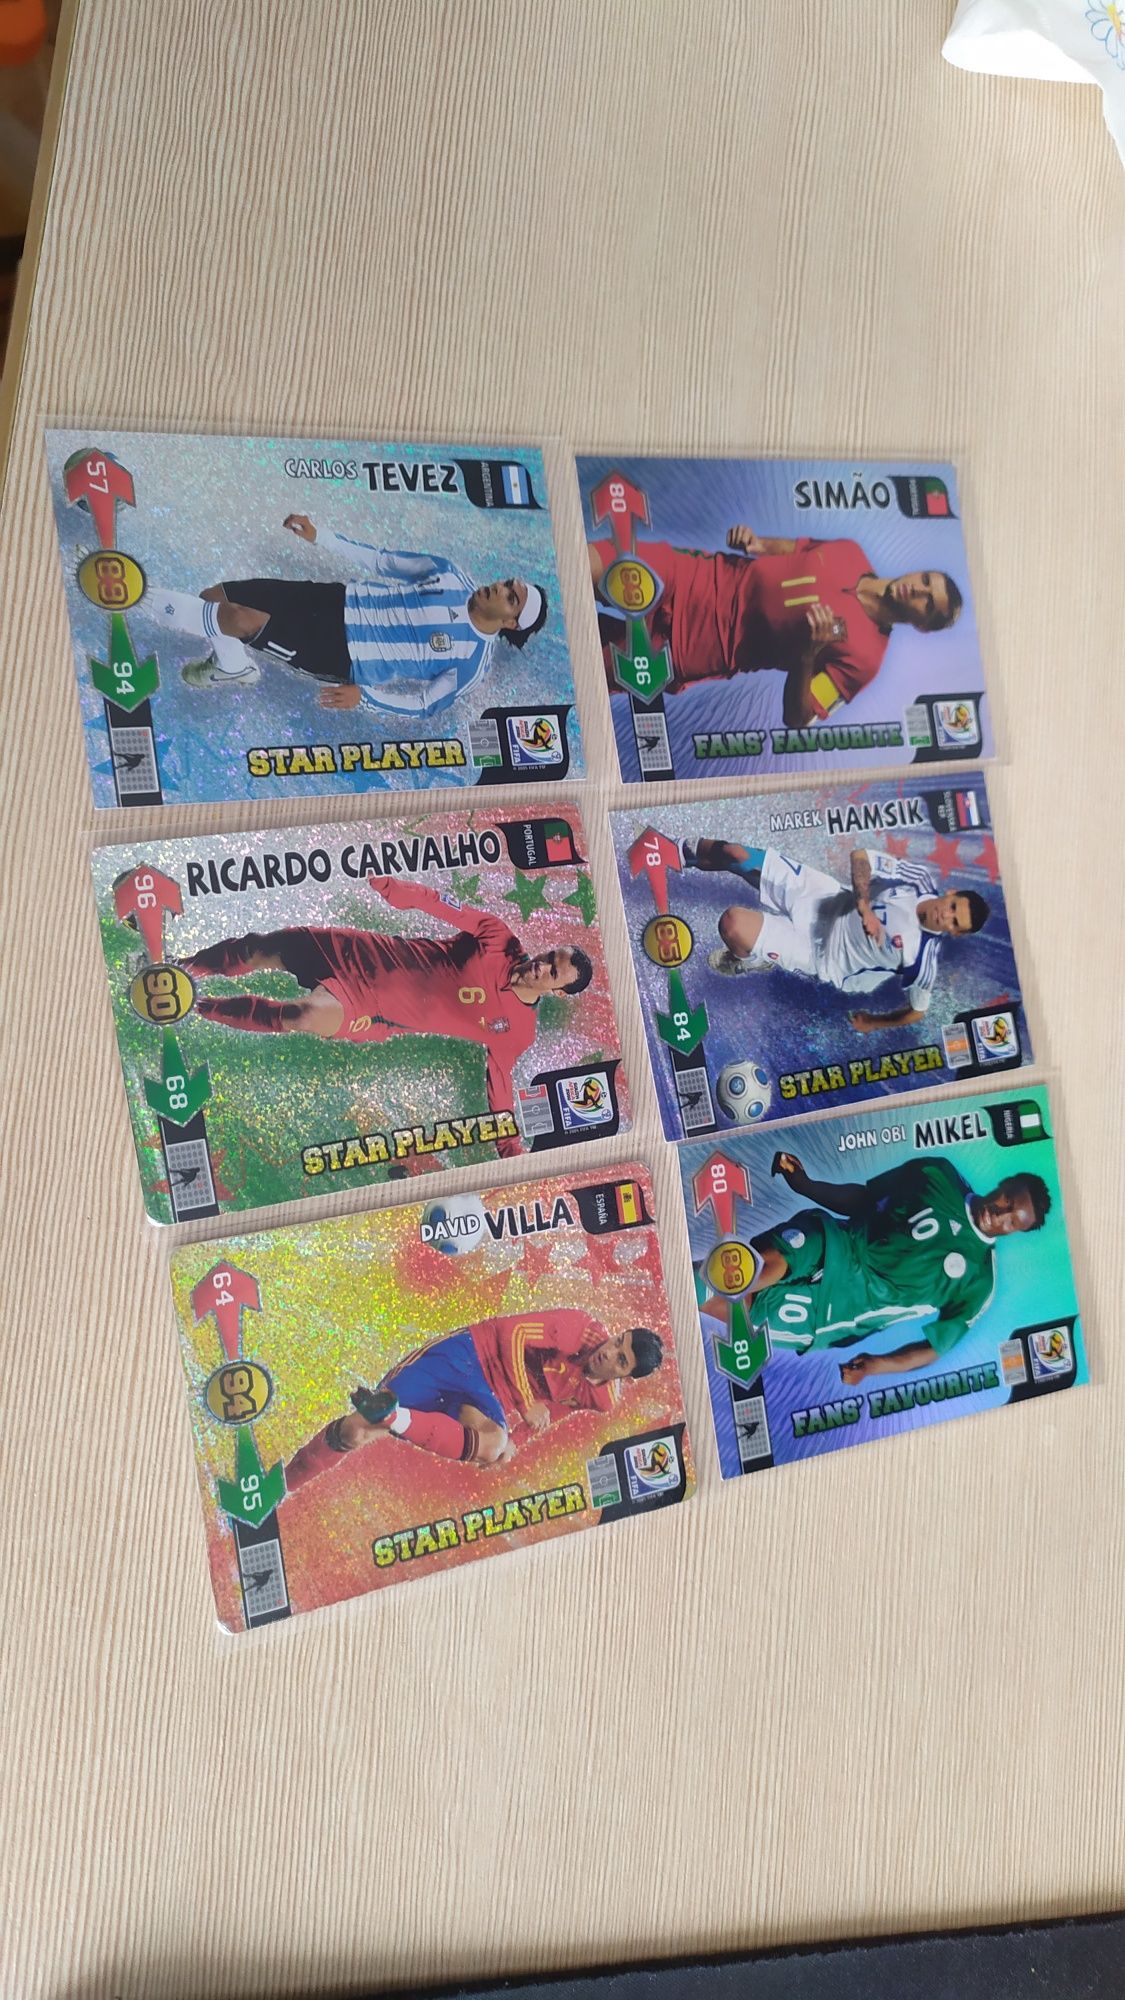 Karty Panini World Cup Africa 2010 RPA